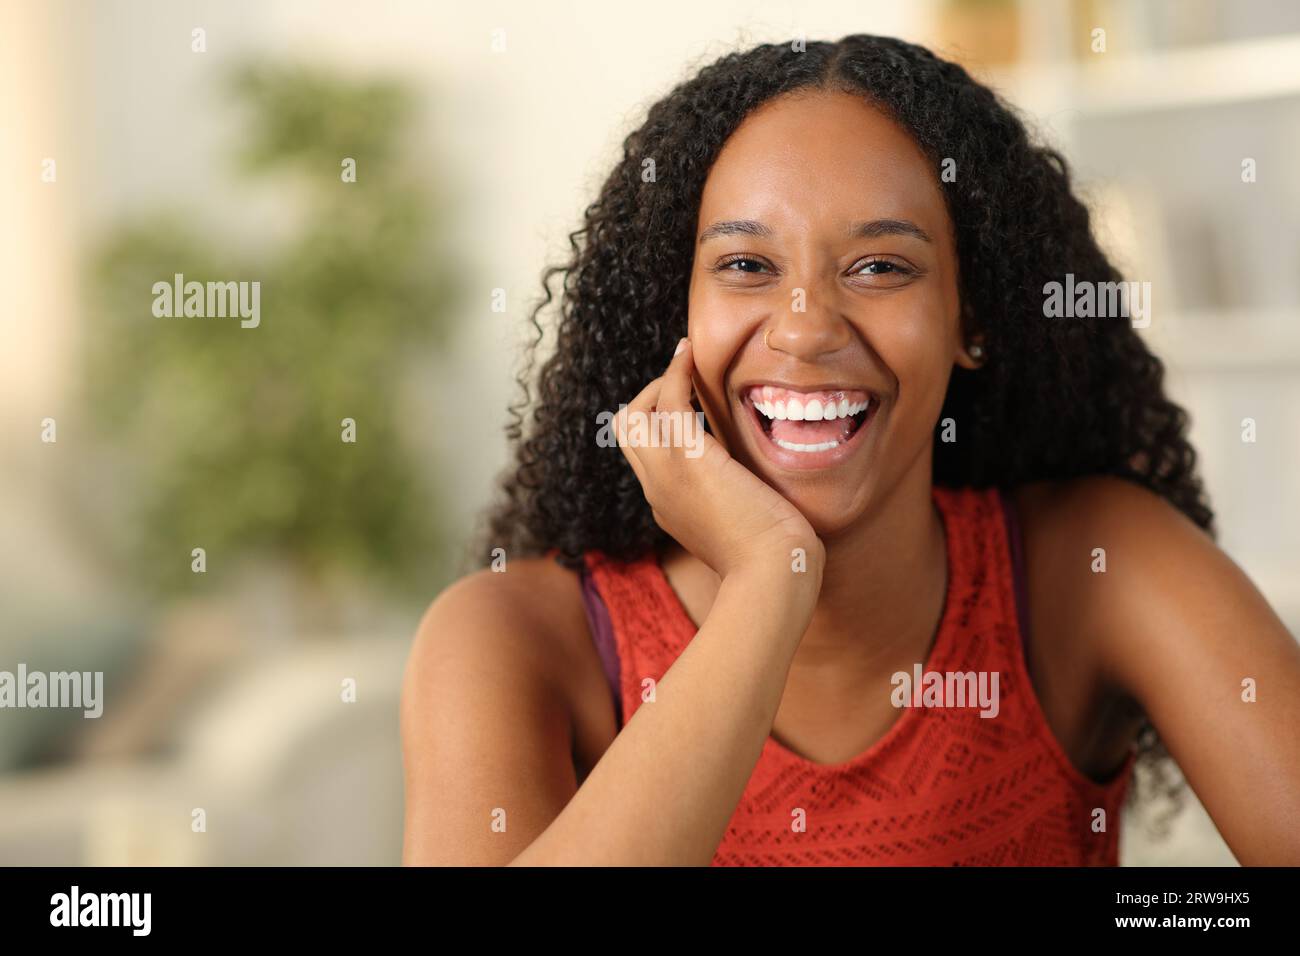 Front view portrait of a black woman laughing at camera with white teeth at home Stock Photo